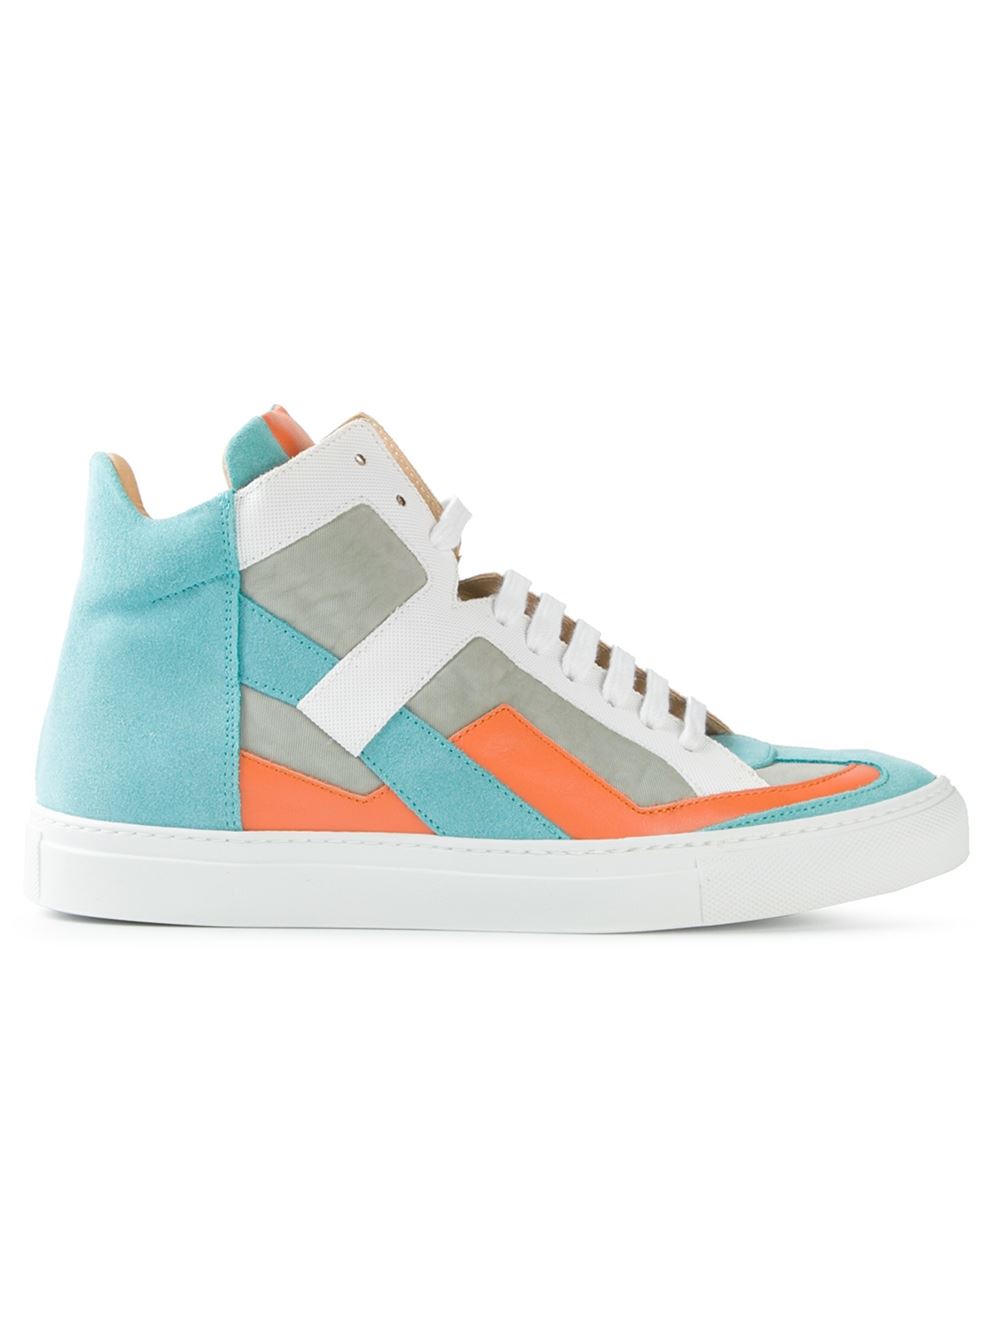 15 Stylish Sneakers For Summer